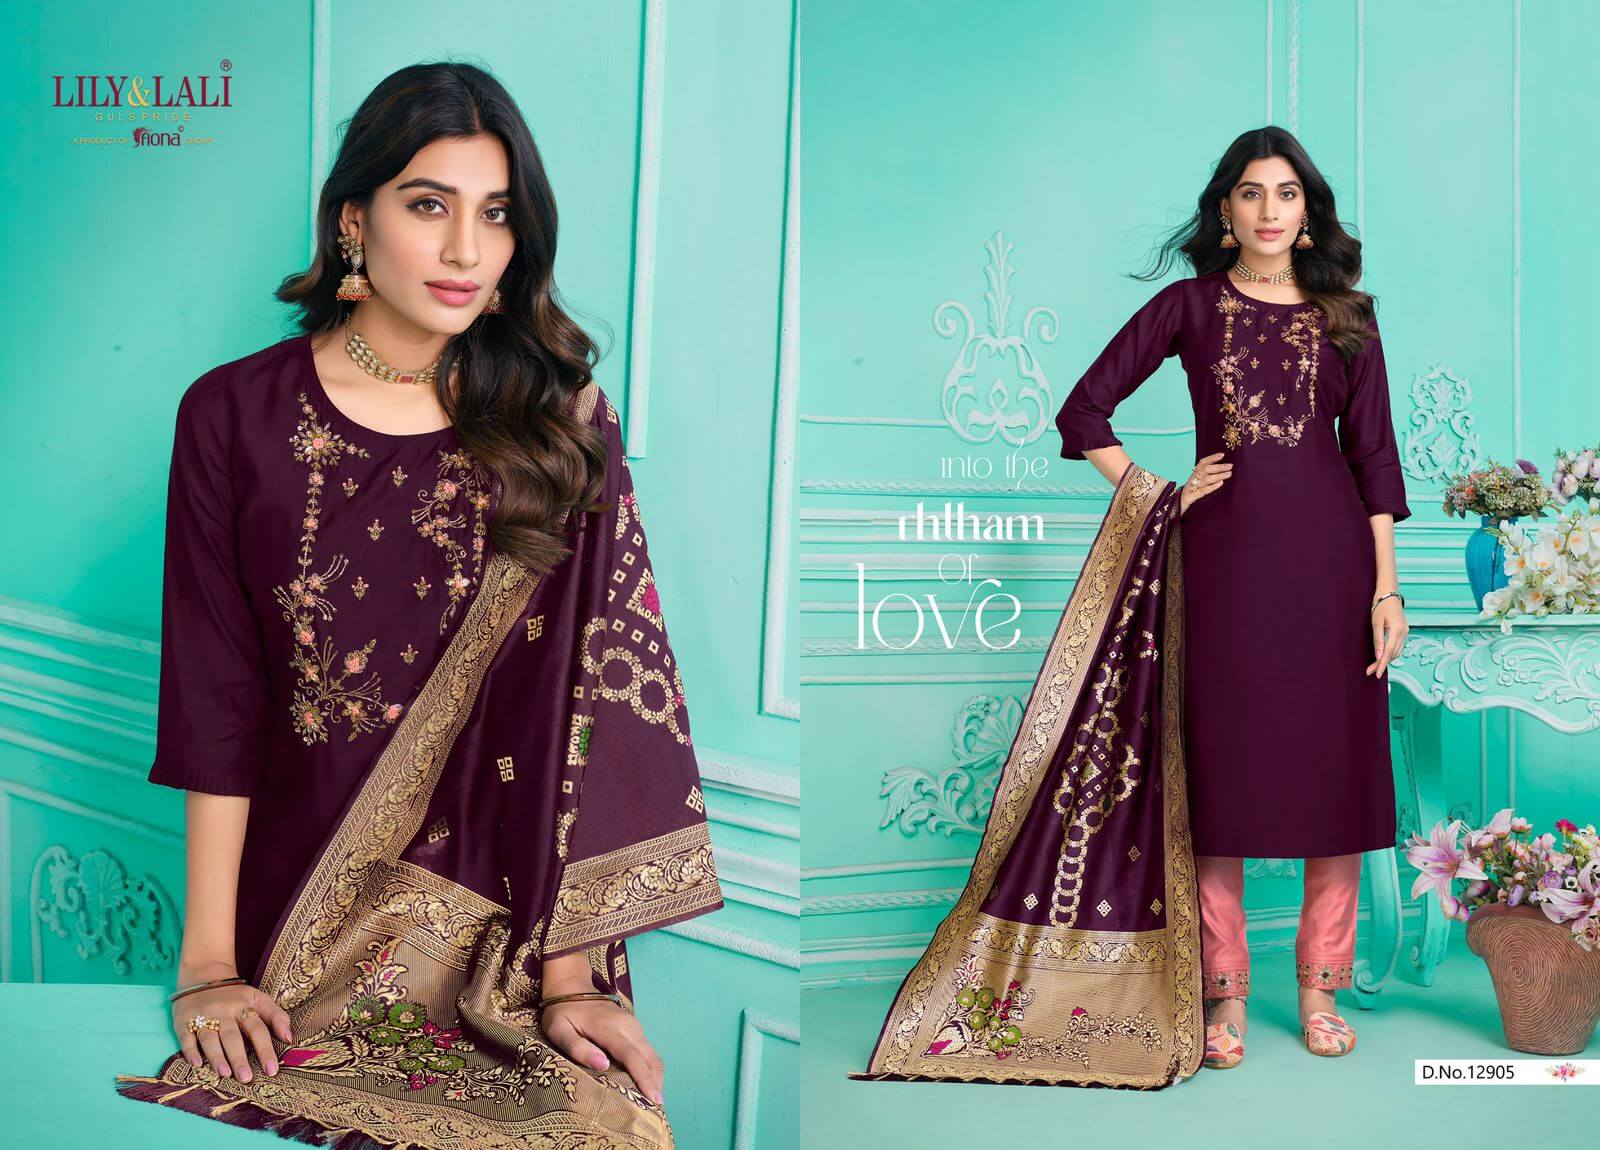 Lily And Lali Gulmeena Vol 2 collection 9